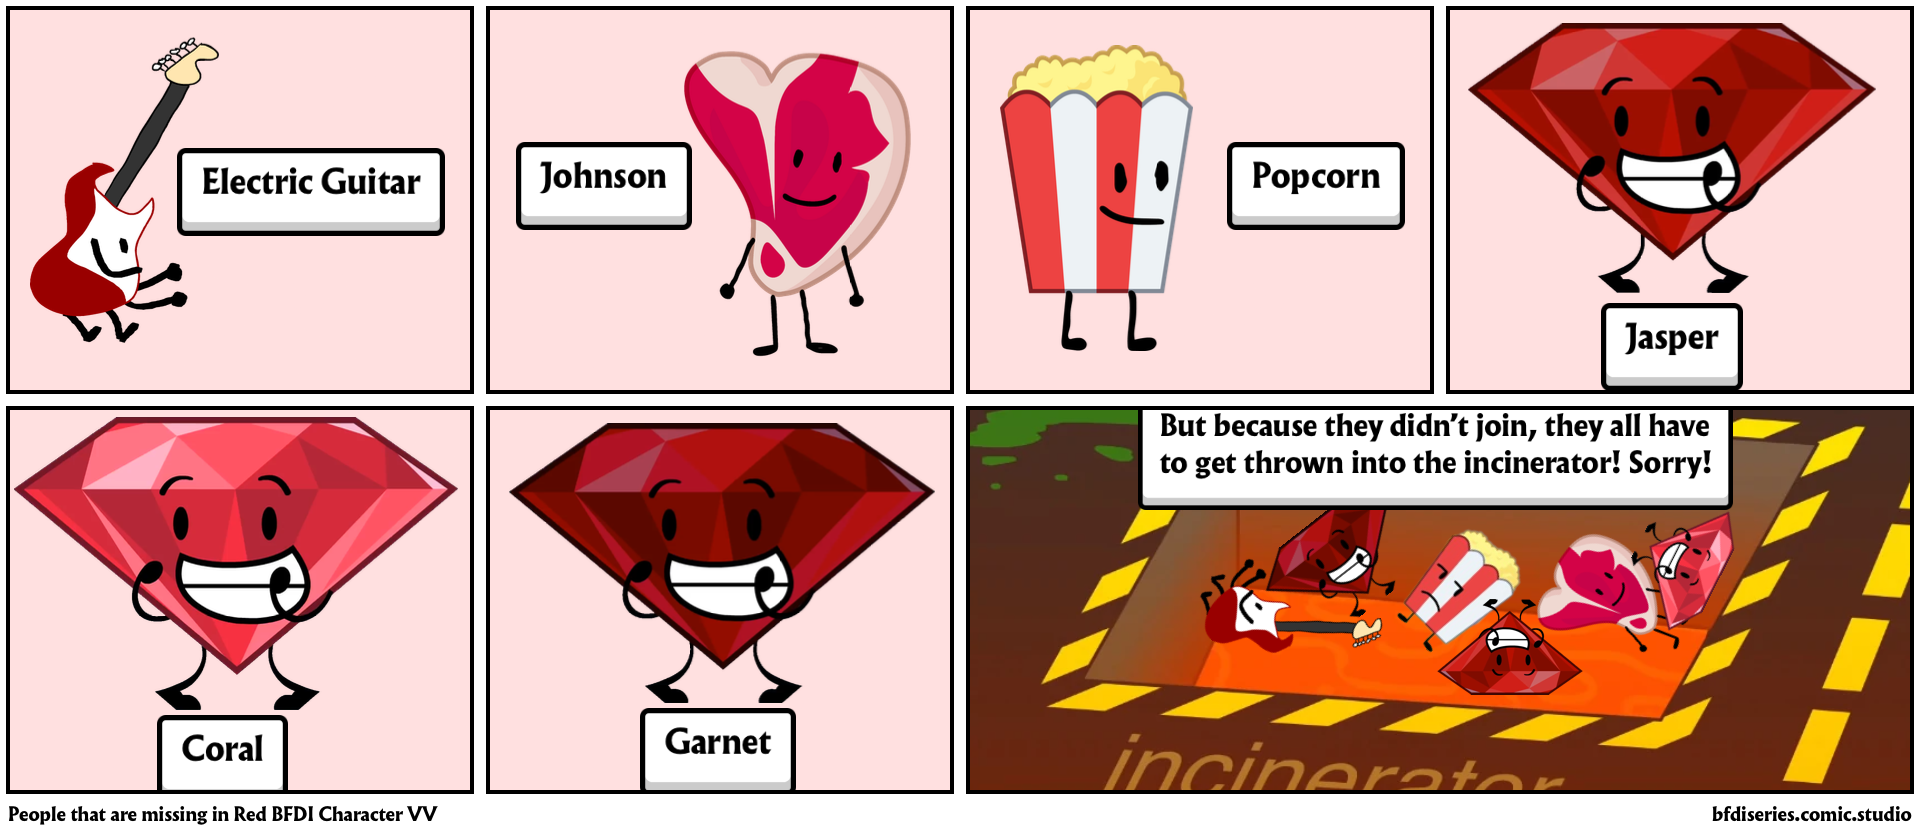 People that are missing in Red BFDI Character VV